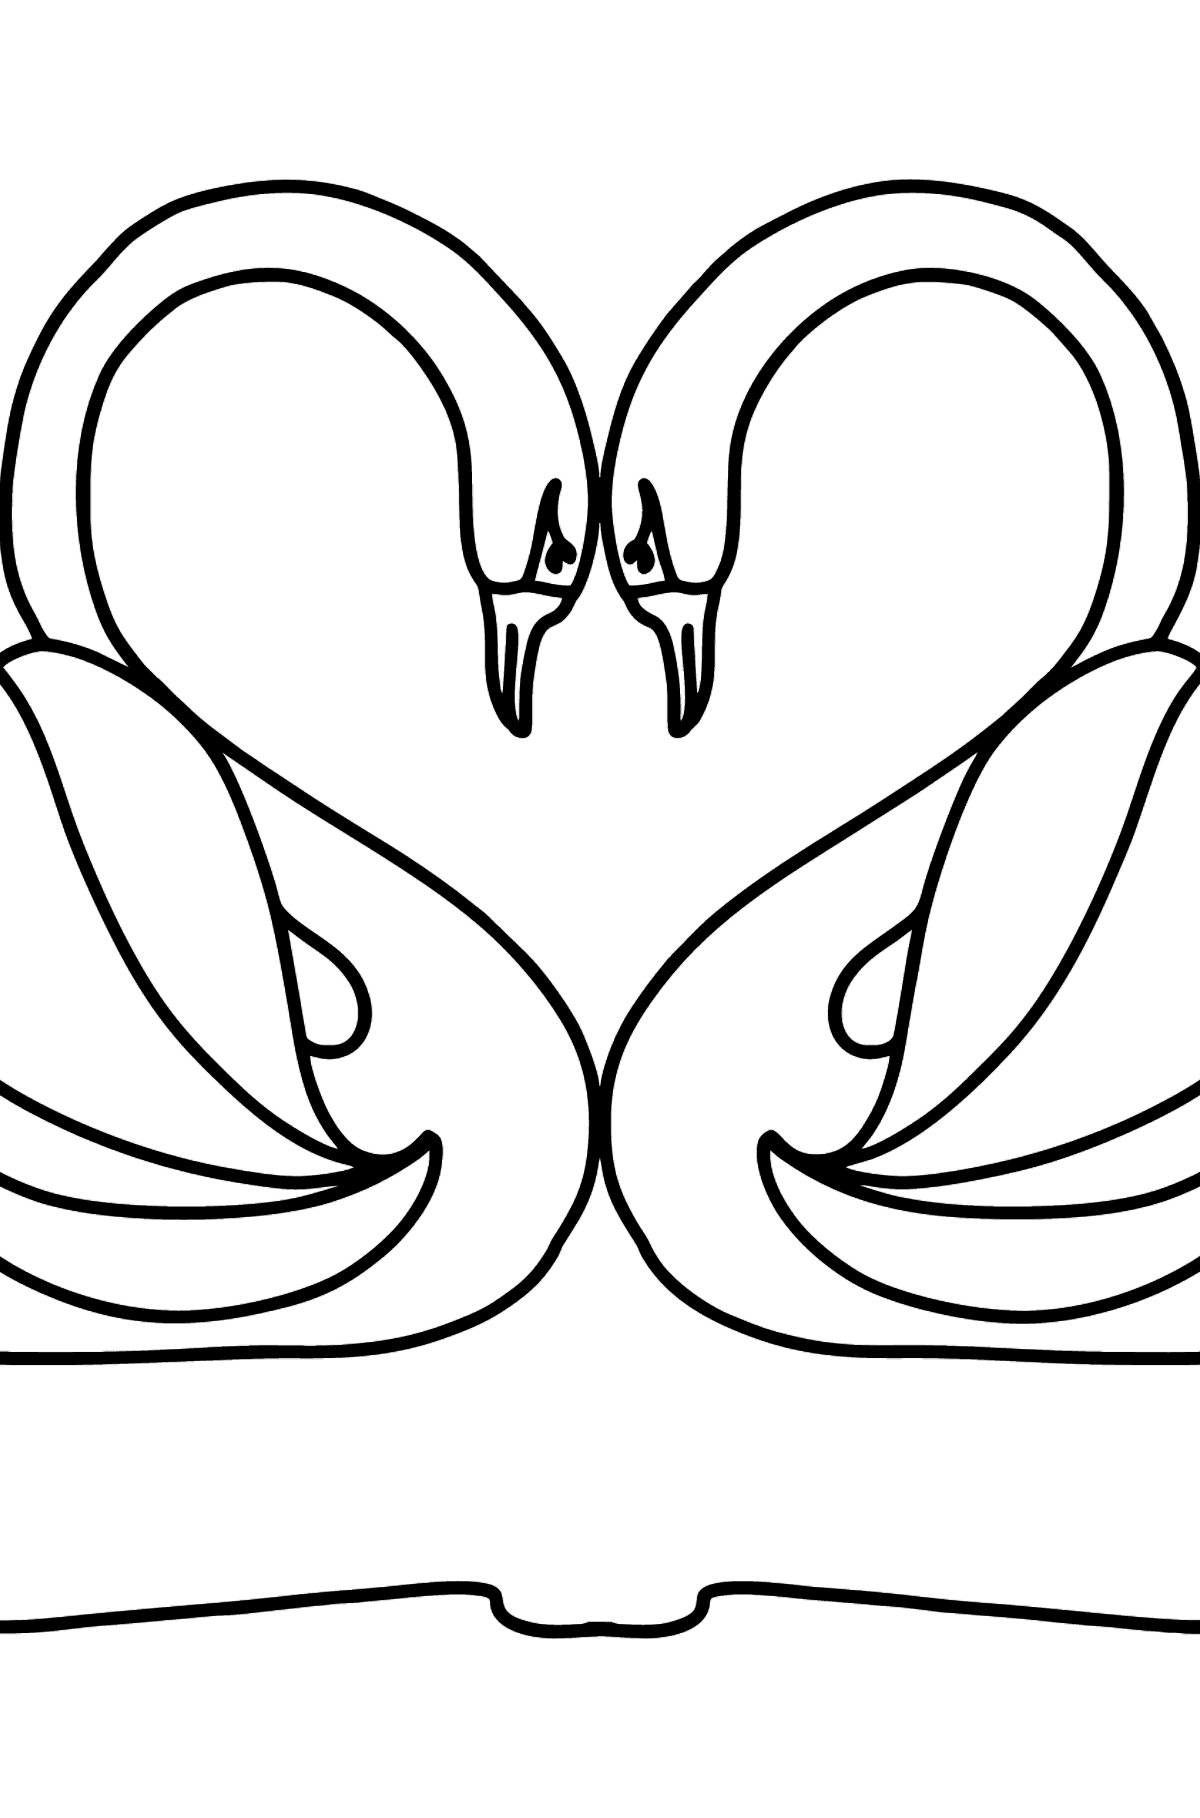 Black Swans coloring page - Coloring Pages for Kids